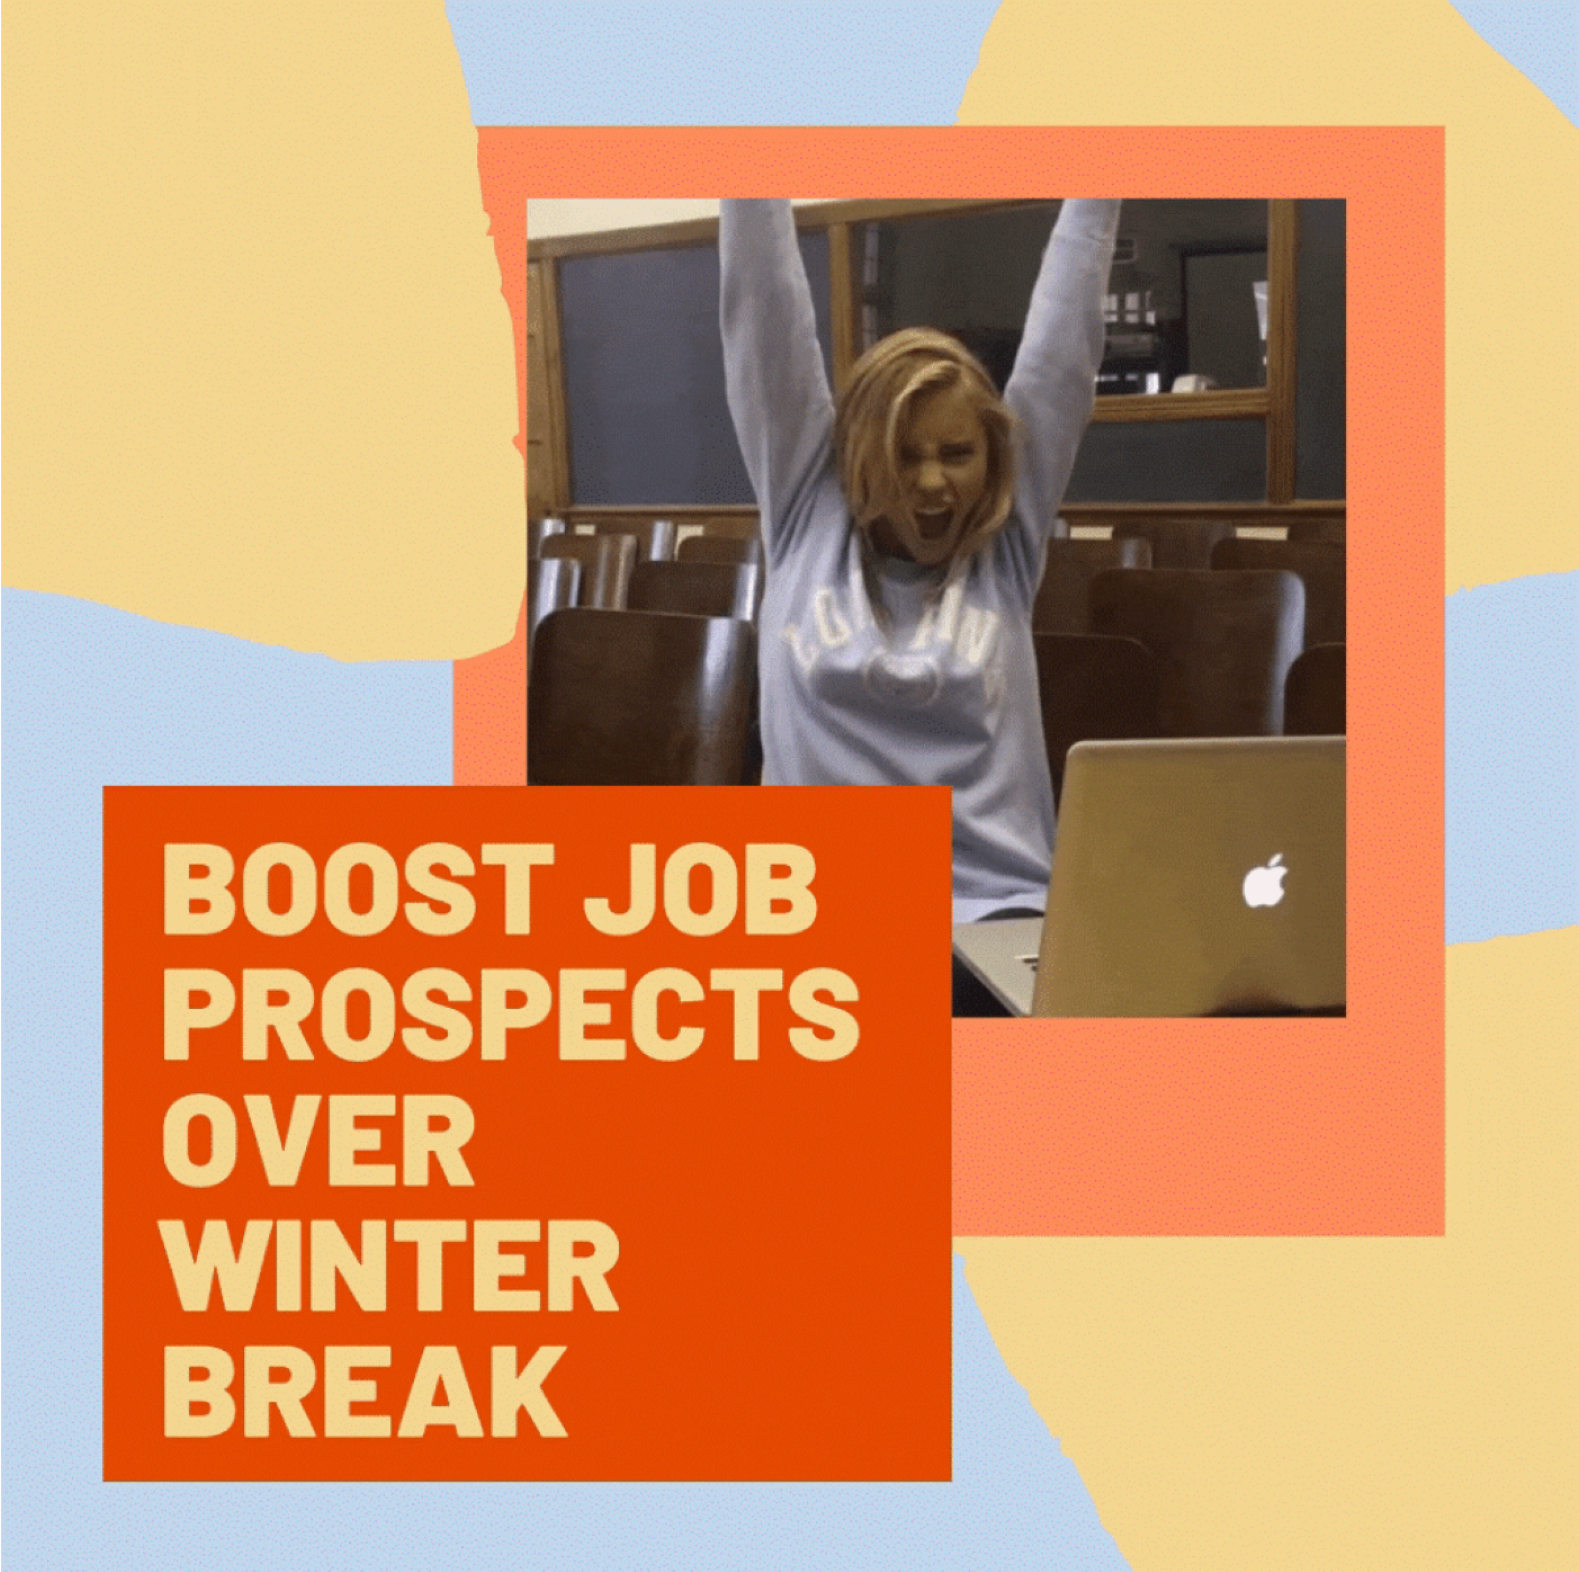 How to Boost Your Job Prospects Over Winter Break